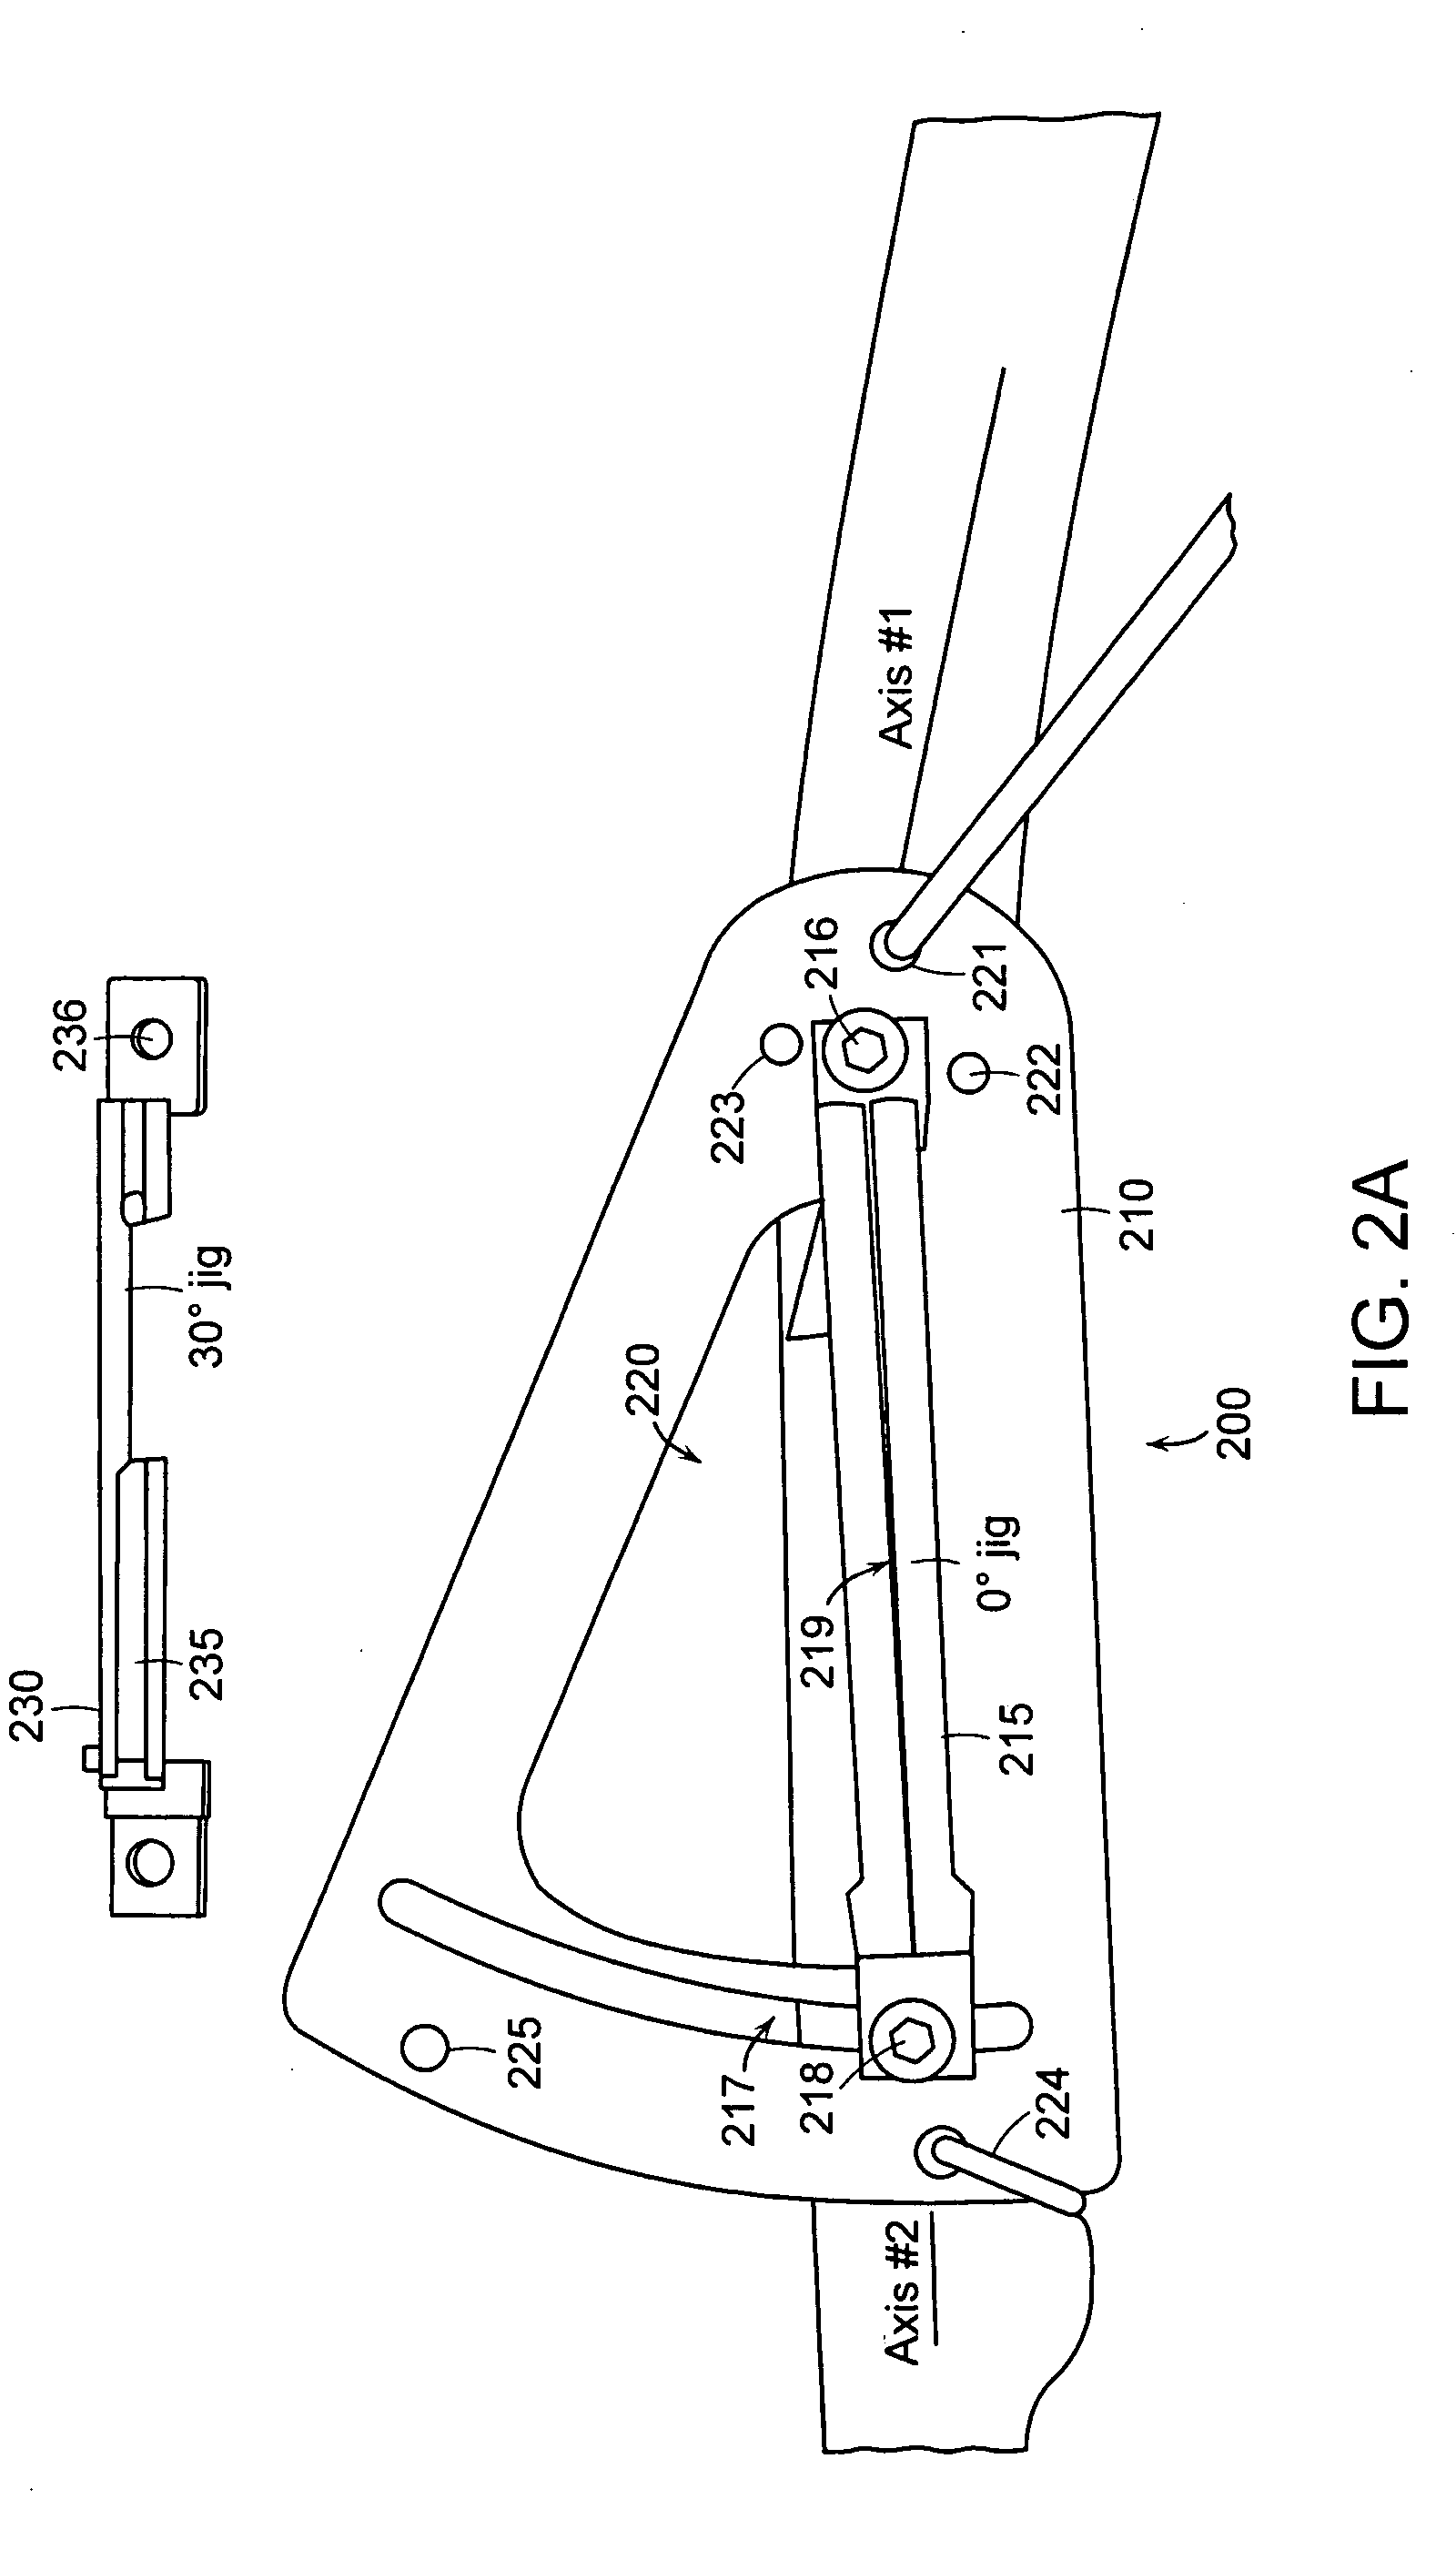 Three-dimensional osteotomy device and method for treating bone deformities